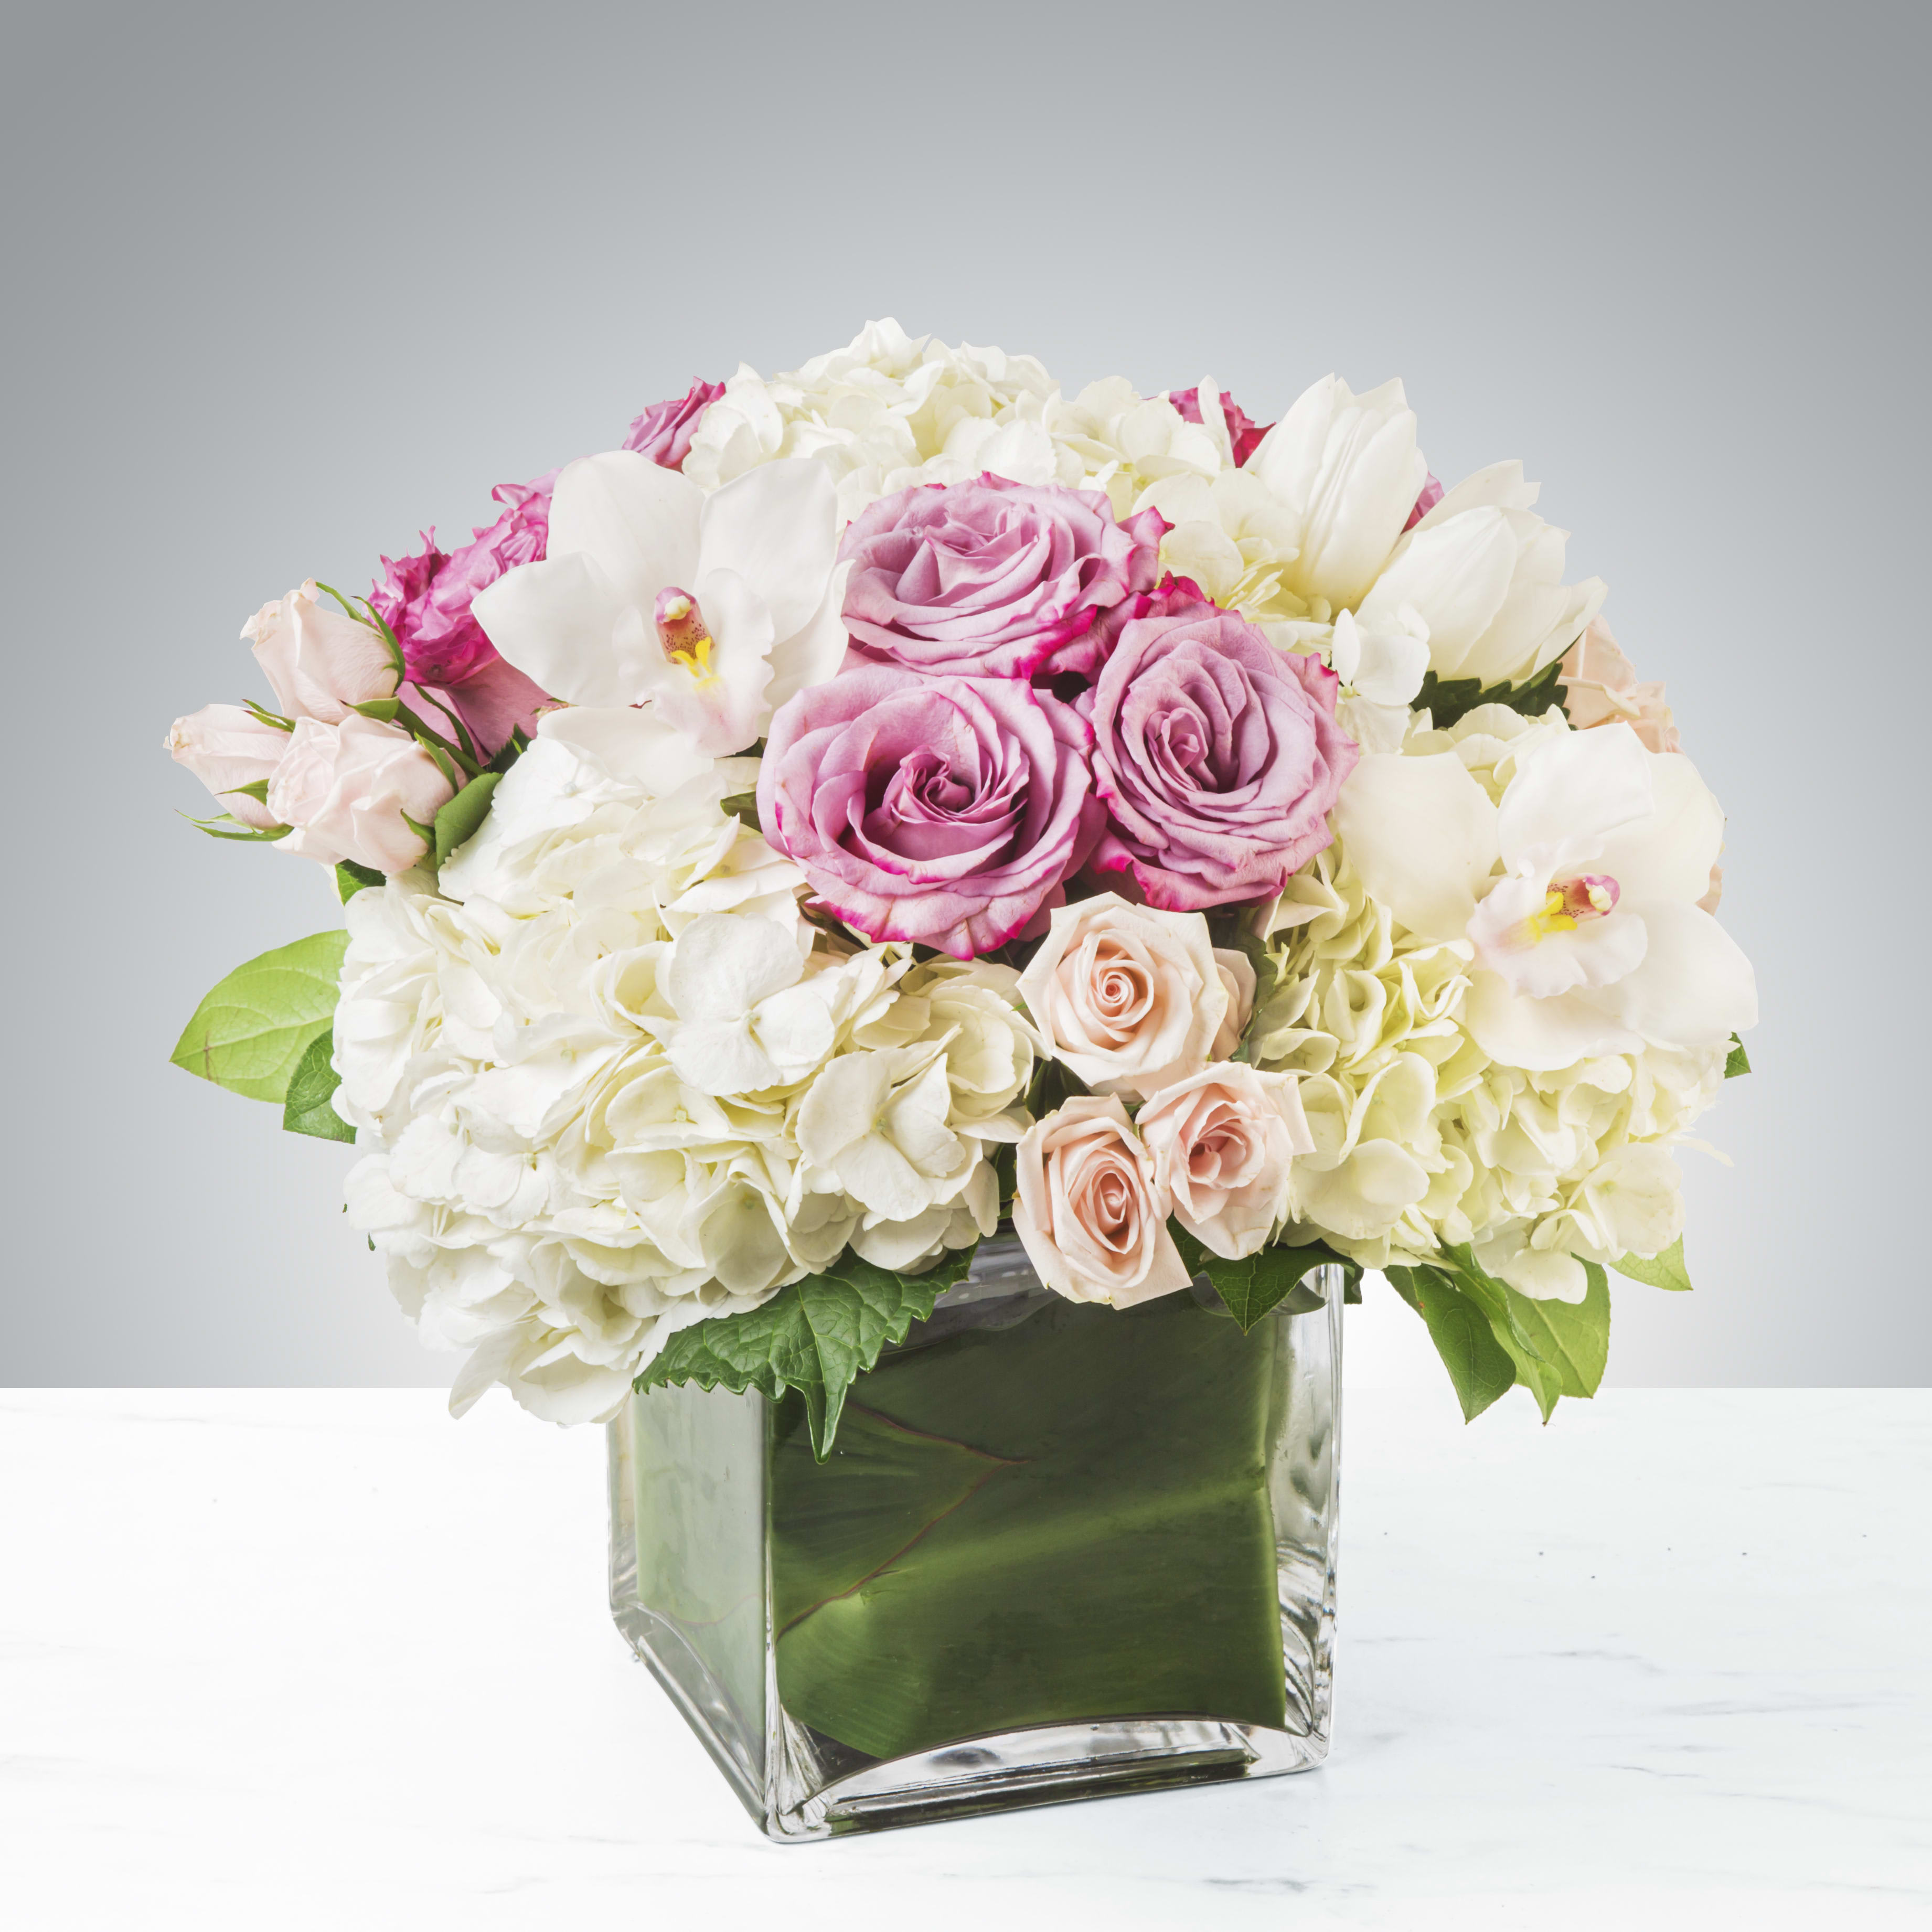 Carolina - Classic and Beautiful, this large arrangement whispers luxury. Soft pinks, whites and creams come together to create an appealingly feminine gift. Perfect for welcoming a new baby, wishing happy birthday or saying congratulations.   APPROXIMATE DIMENSIONS: 15&quot; W X 15&quot; H    